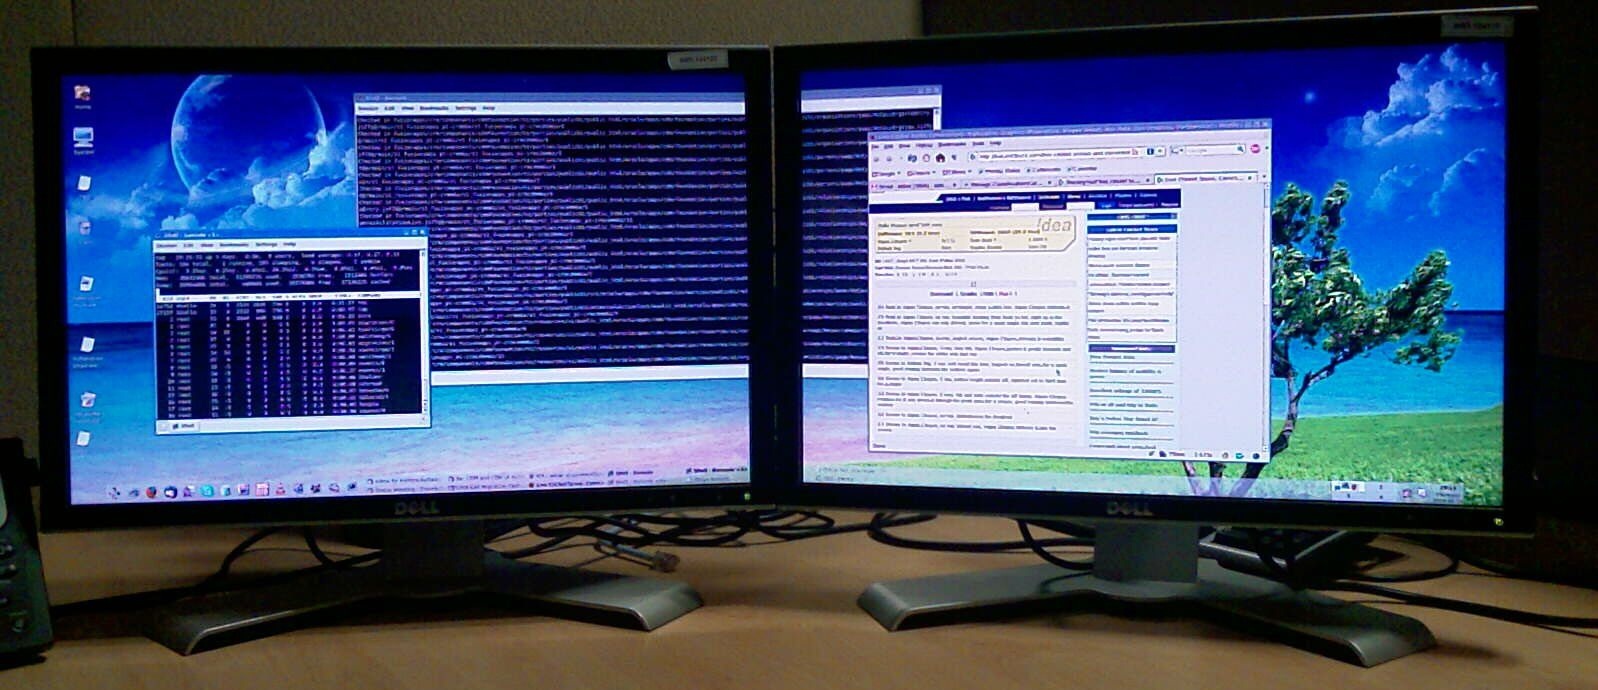 How To Set Different Wallpaper On A Dual Monitor Setup Windows